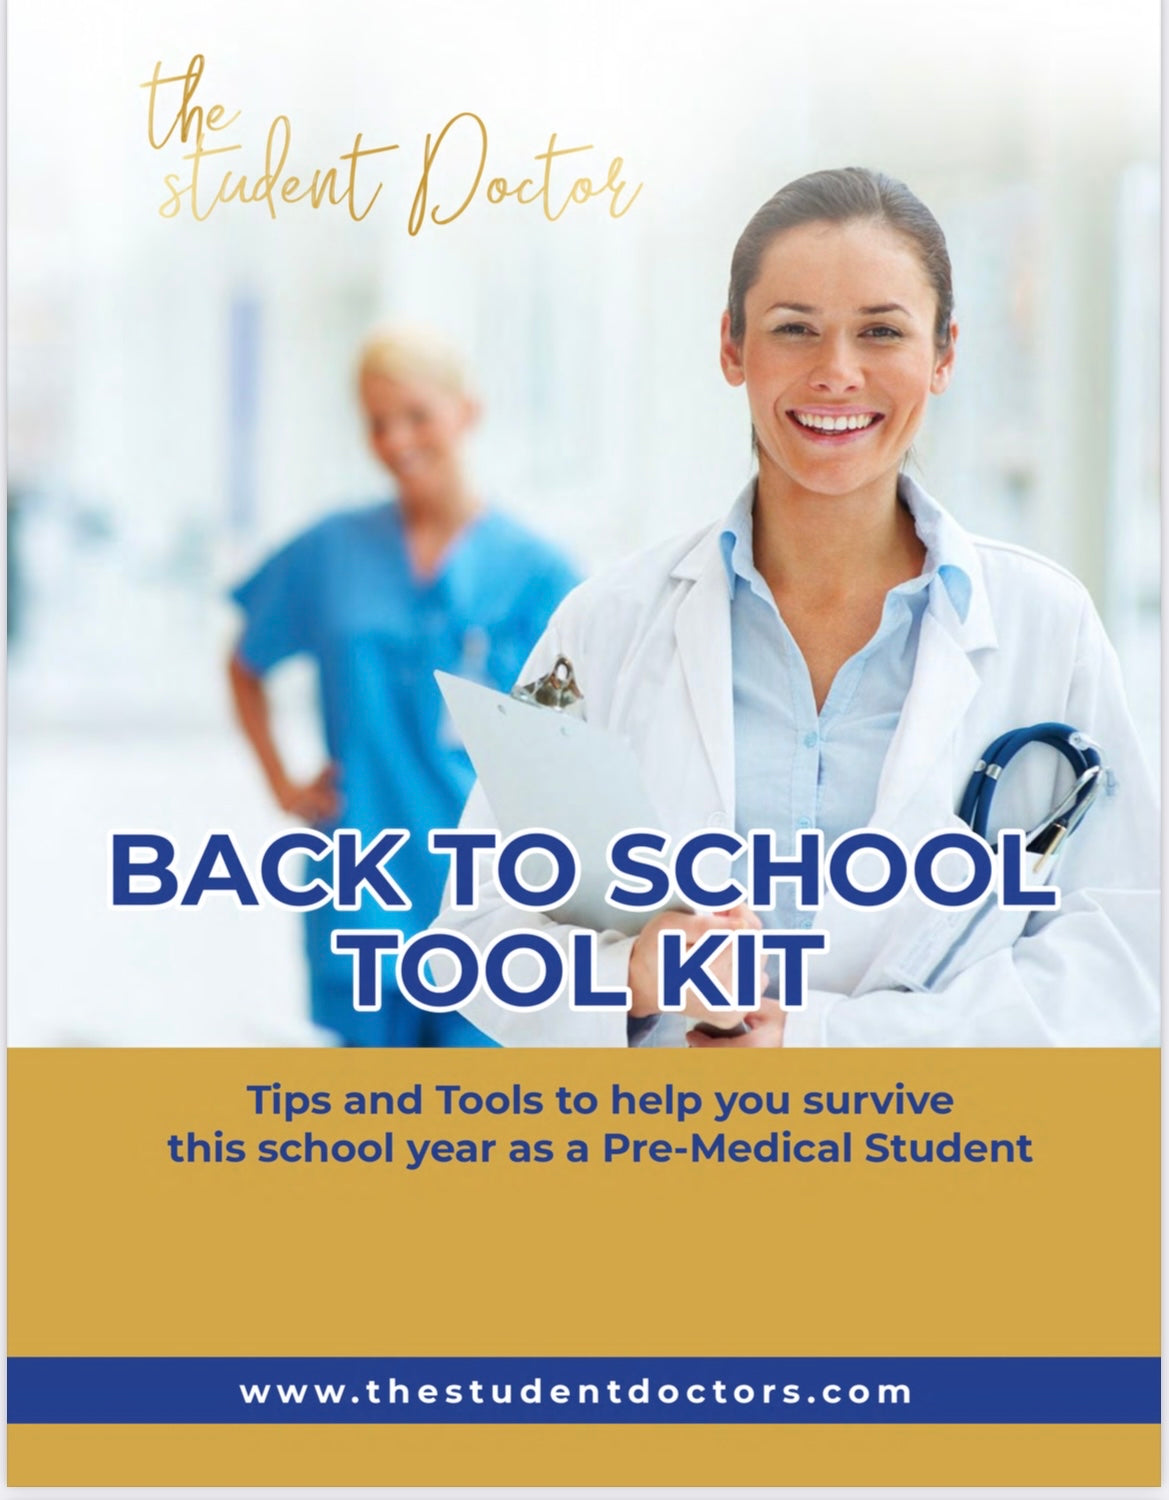 Back to School Toolkit Download